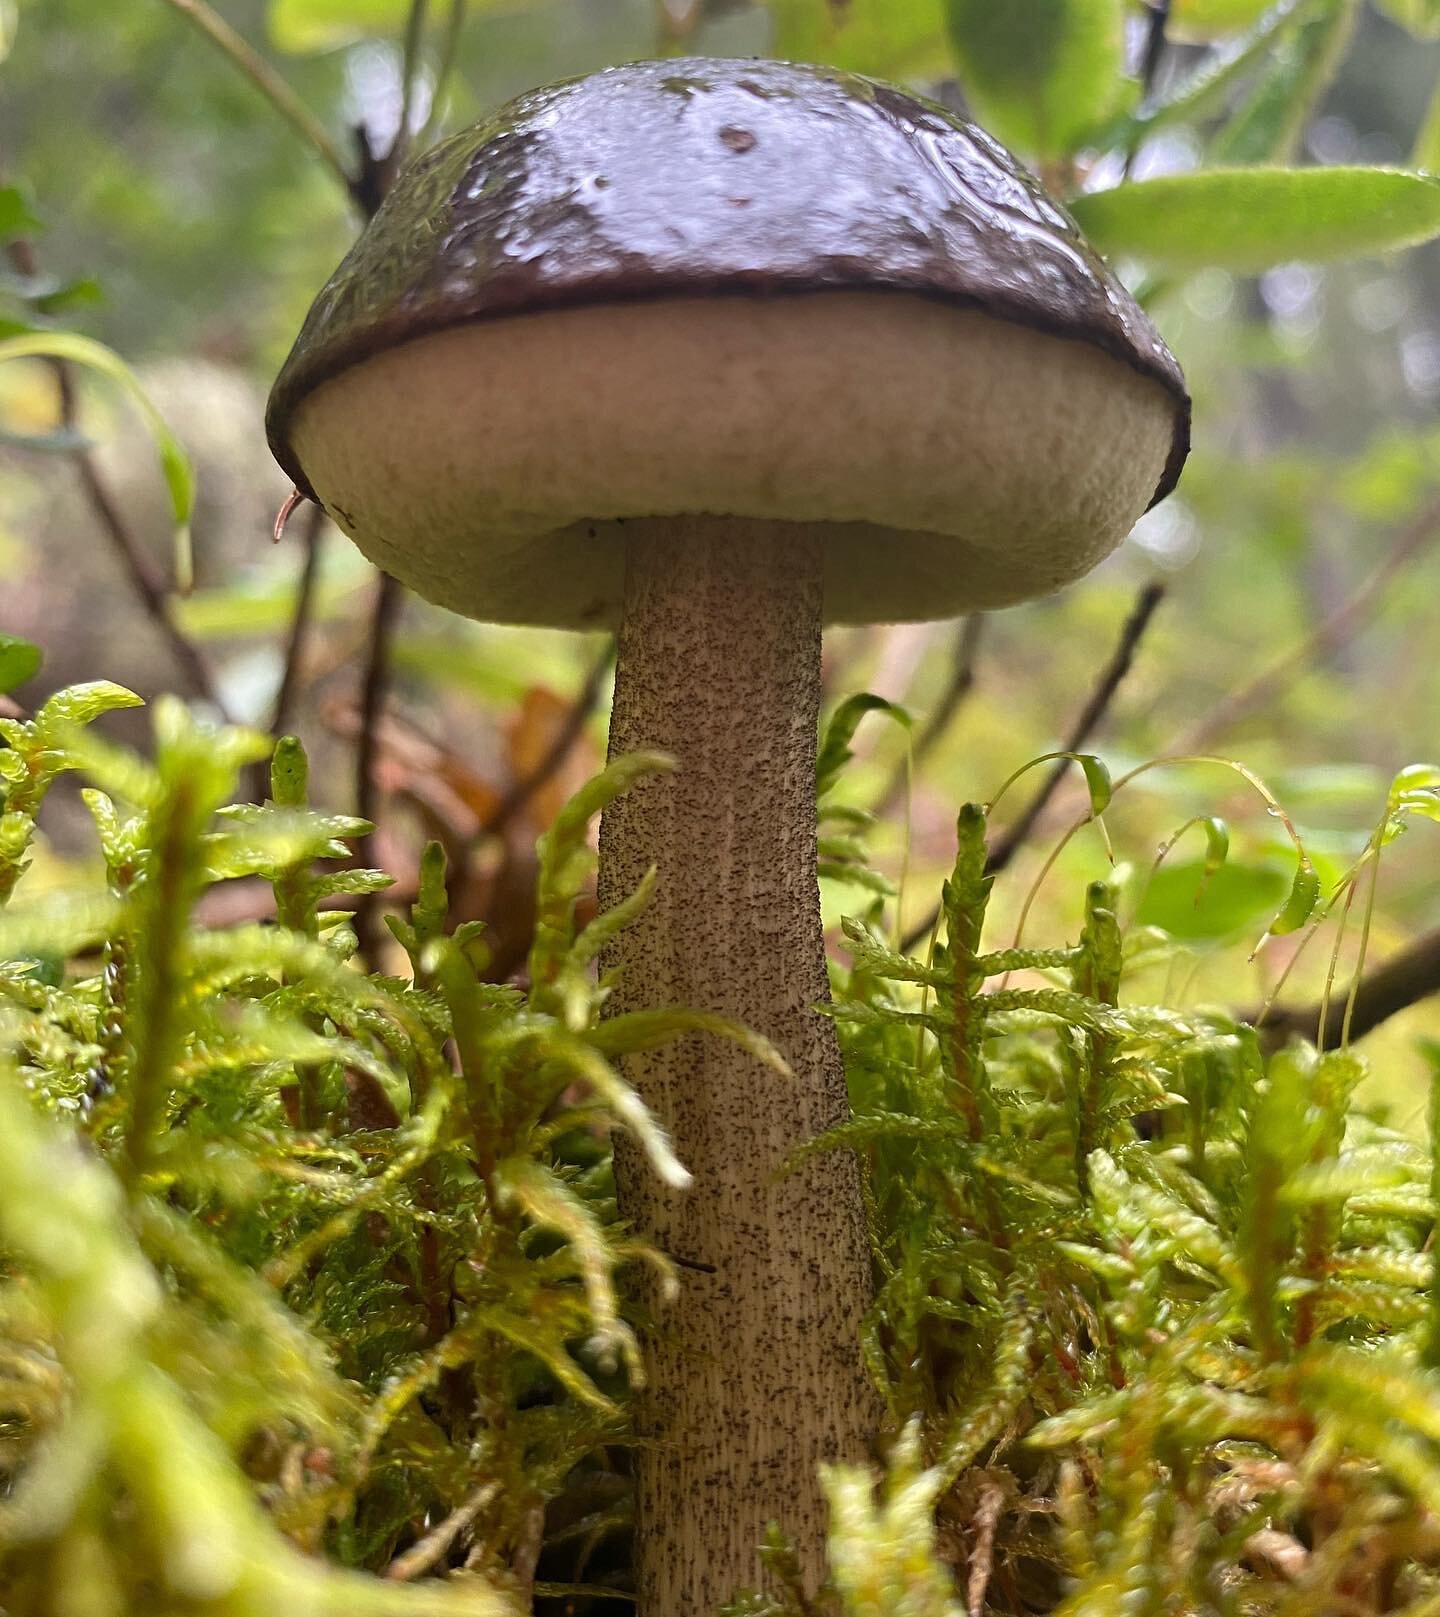 A bolete, Boletus edulis, showing the solid looking, spongy bottom surface, which is the defining characteristic of boletes.
A bolete is a type of mushroom, or fungal fruiting body. It can be identified thanks to a unique mushroom cap. The cap is cle